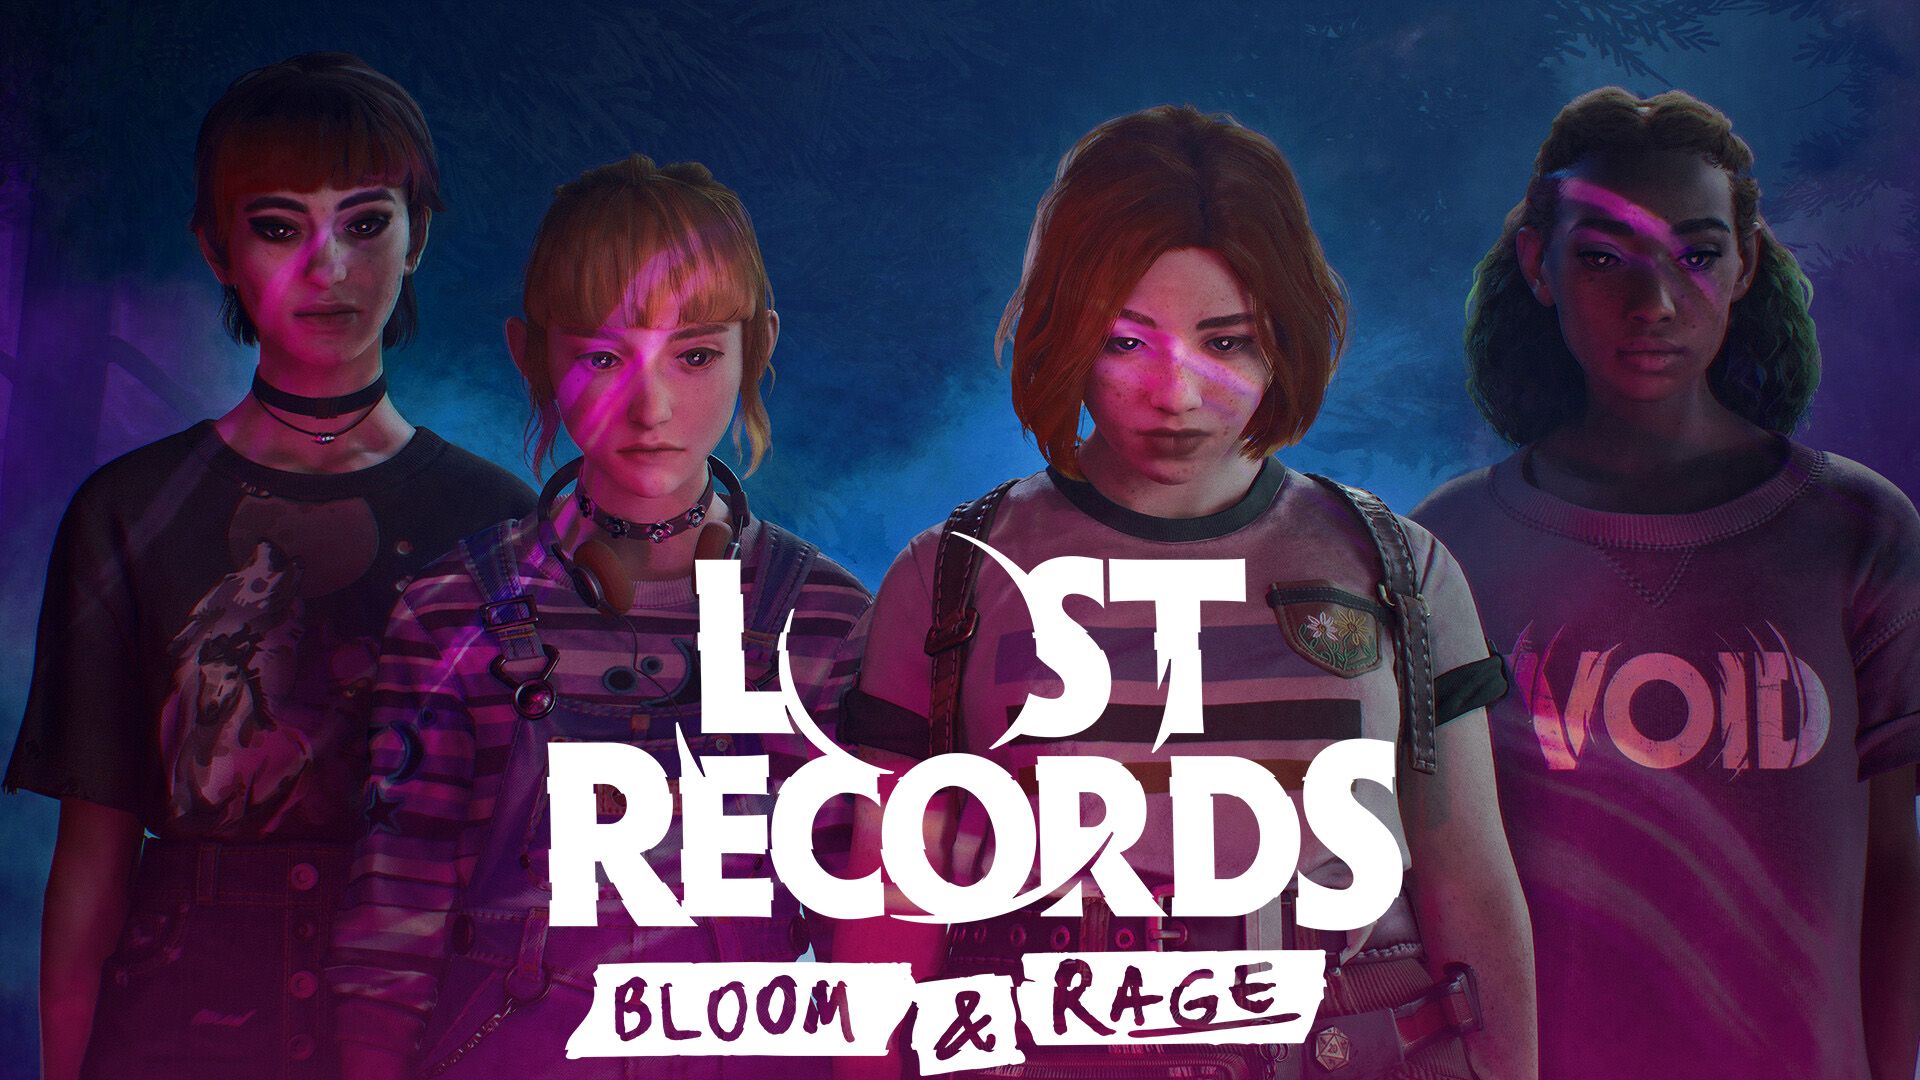 Lost Records Bloom and Rage promo screenshot 1